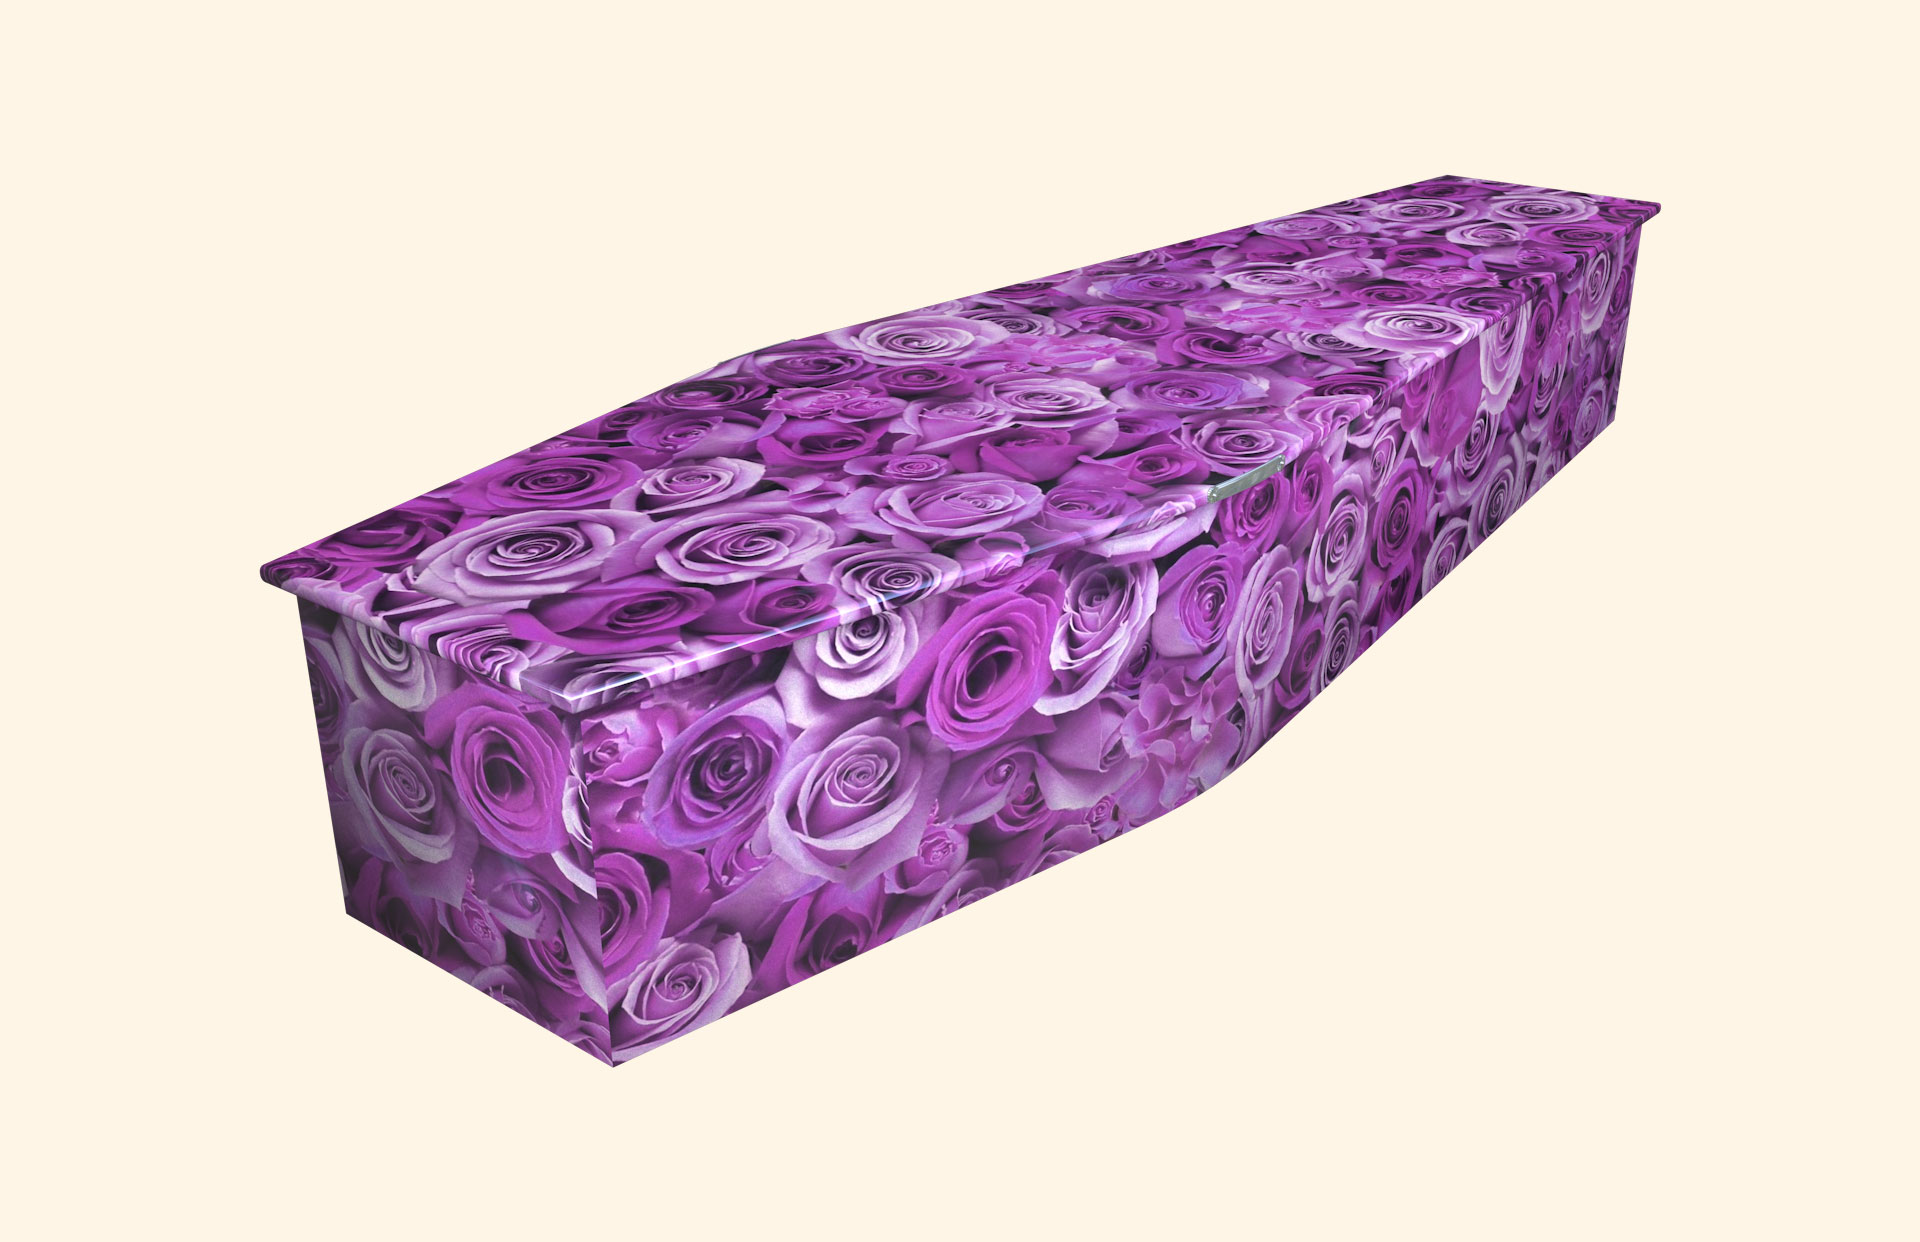 Lilac Roses design on a traditional coffin